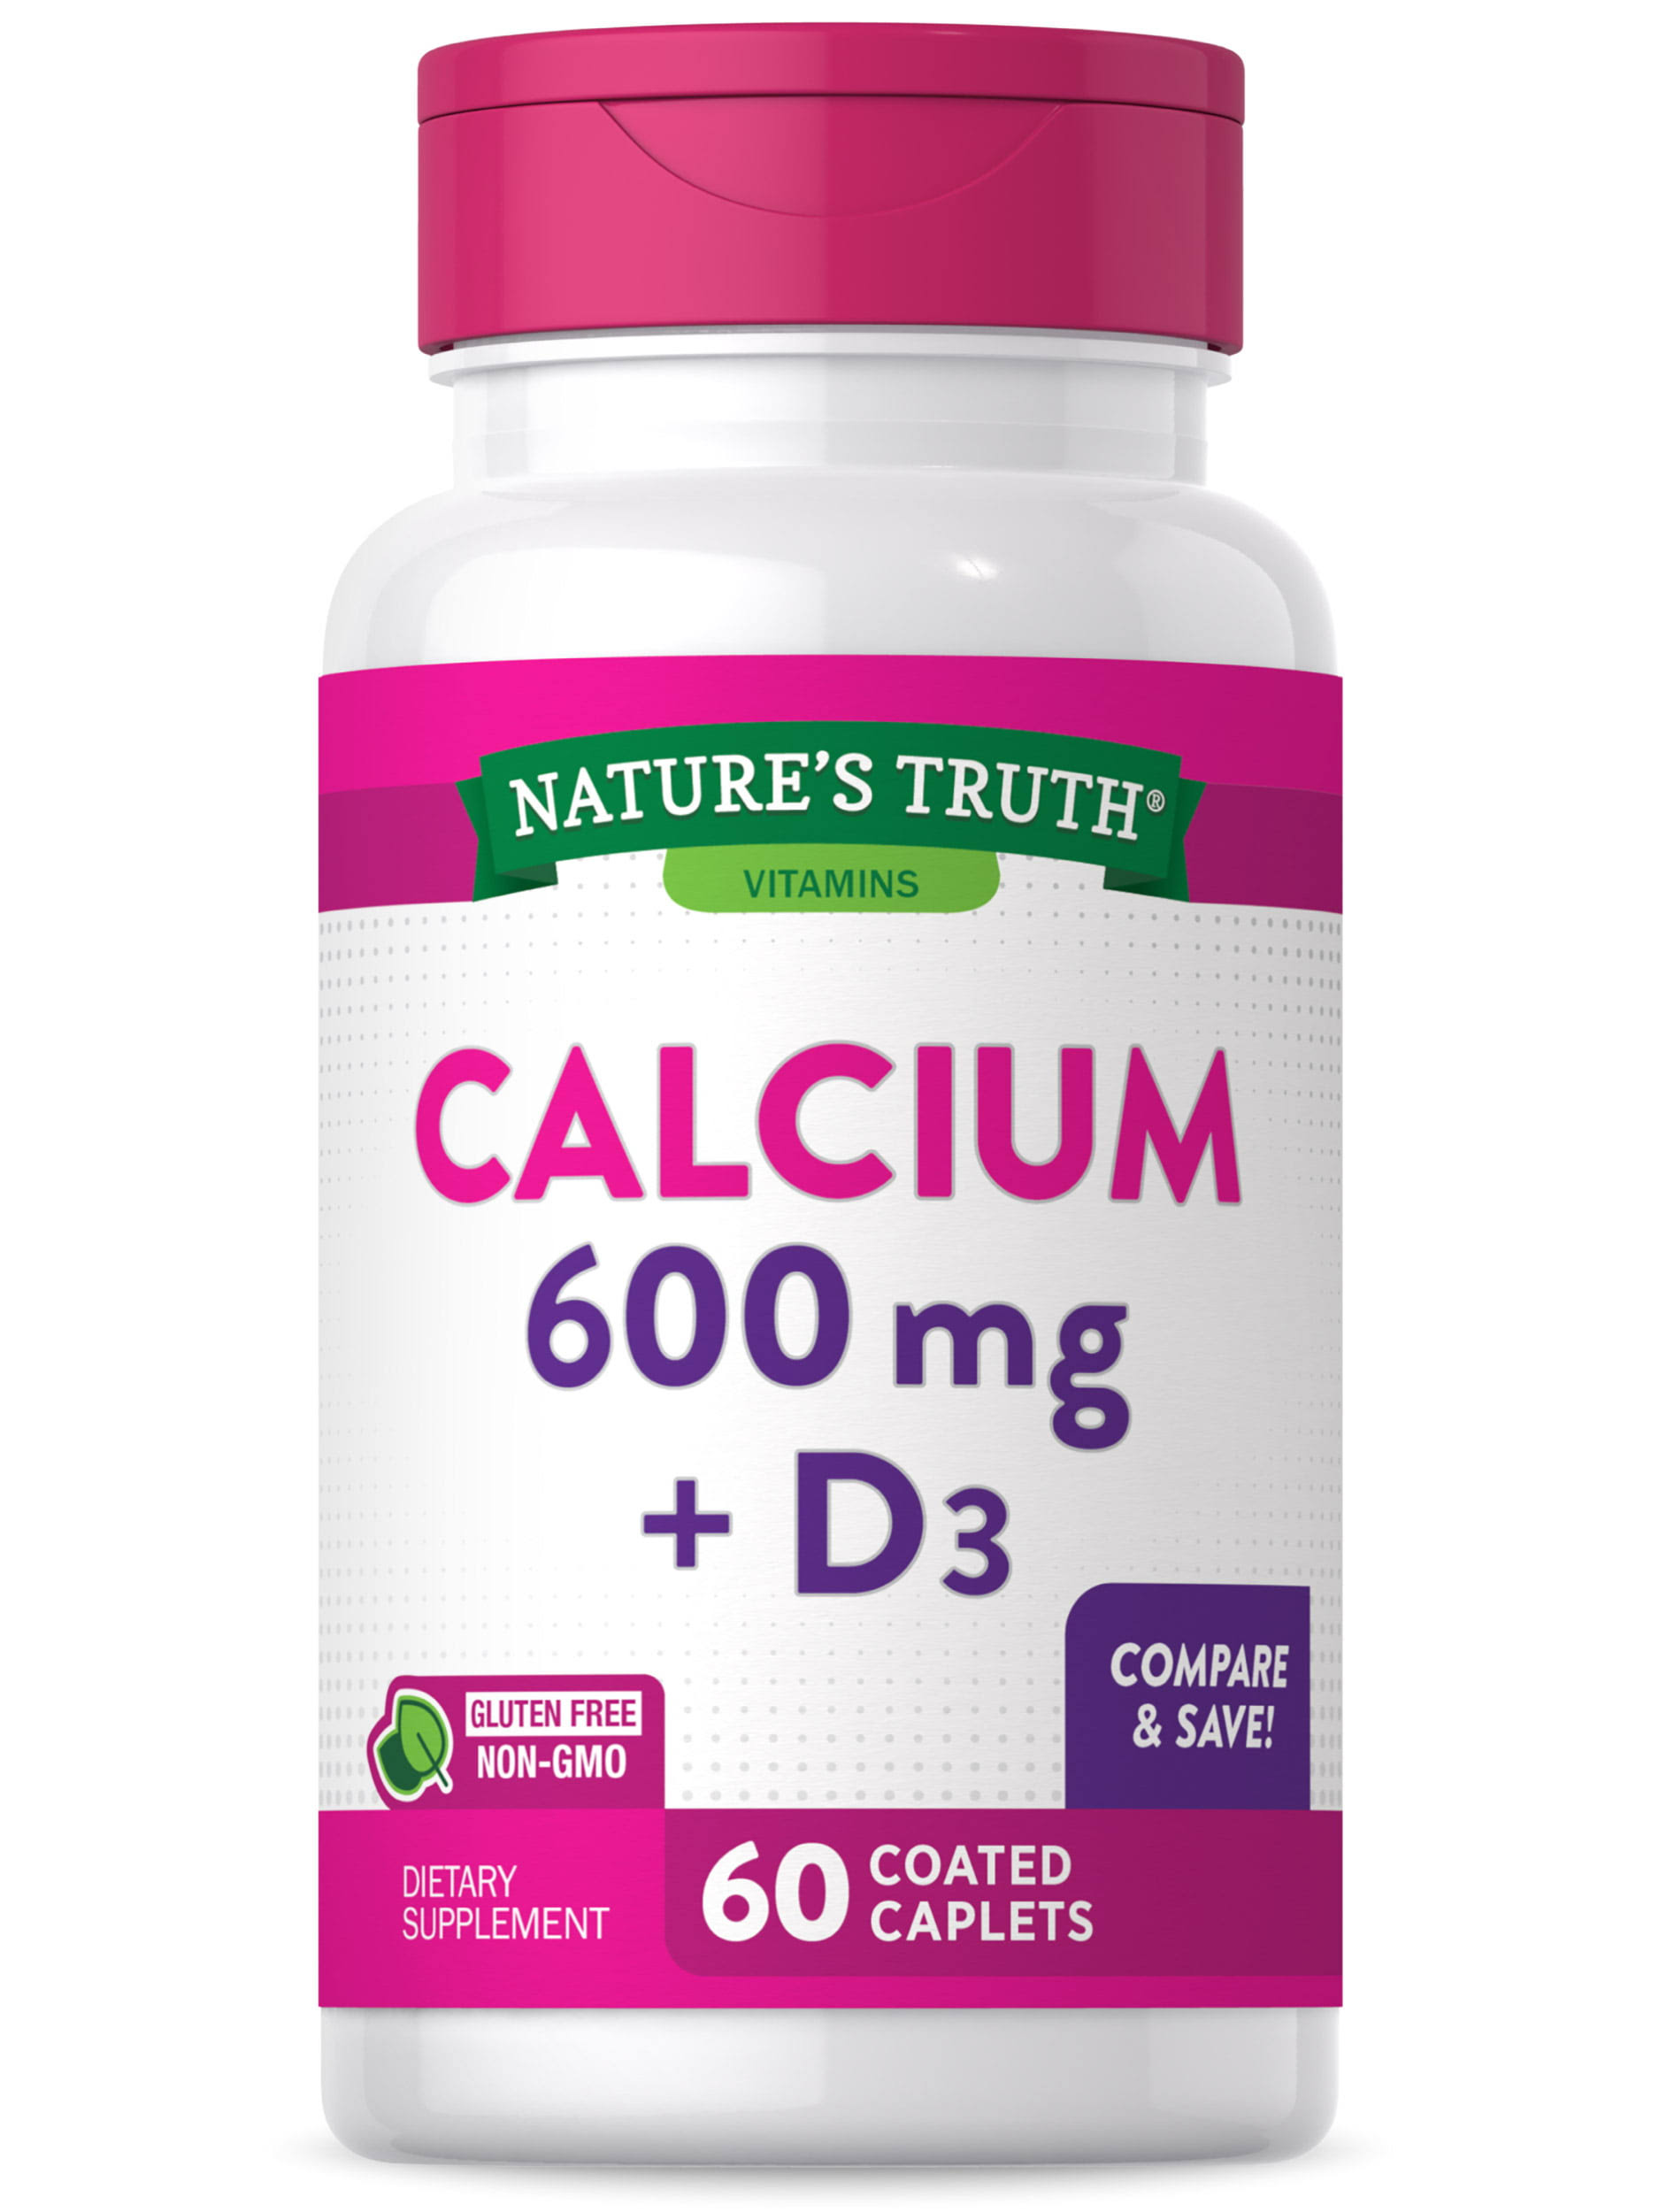 Nature's Truth Calcium Plus Vitamin D3 Tablets - 600mg, x60